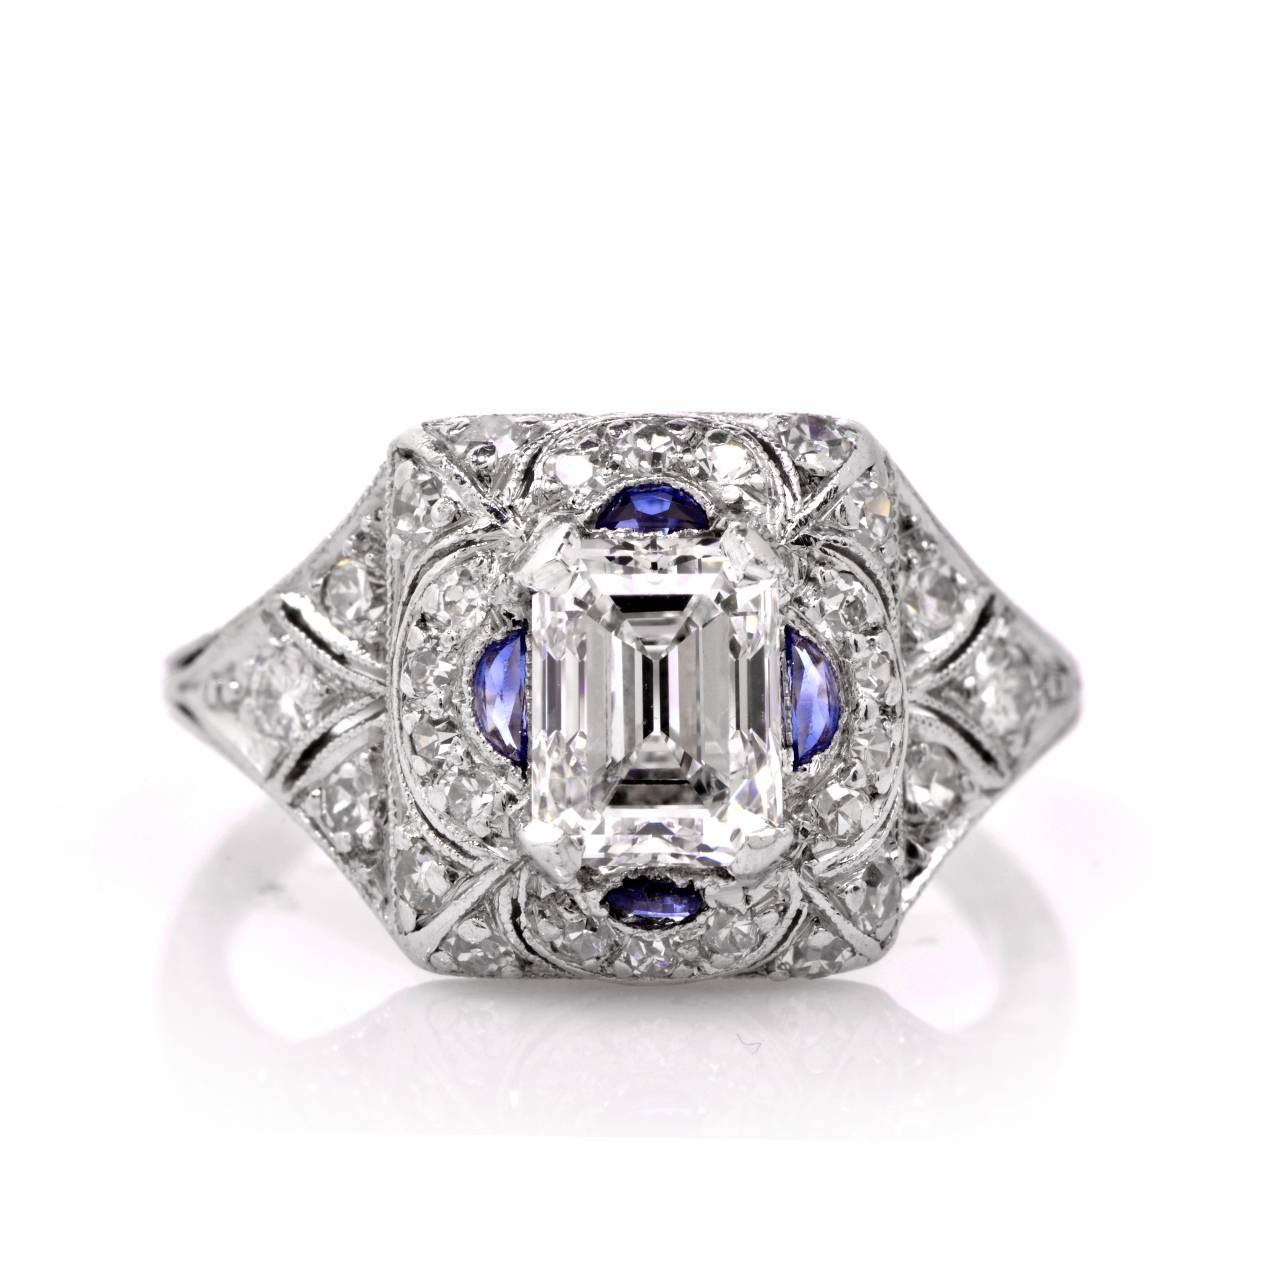 This engagement ring of timeless elegance and notable sparkle  is crafted in solid platinum, exposing a  genuine emerald cut diamond of approx. 0.95 ct, D-E color, VS clarity at the center. The eye-catching precious stone  is complemented by  4